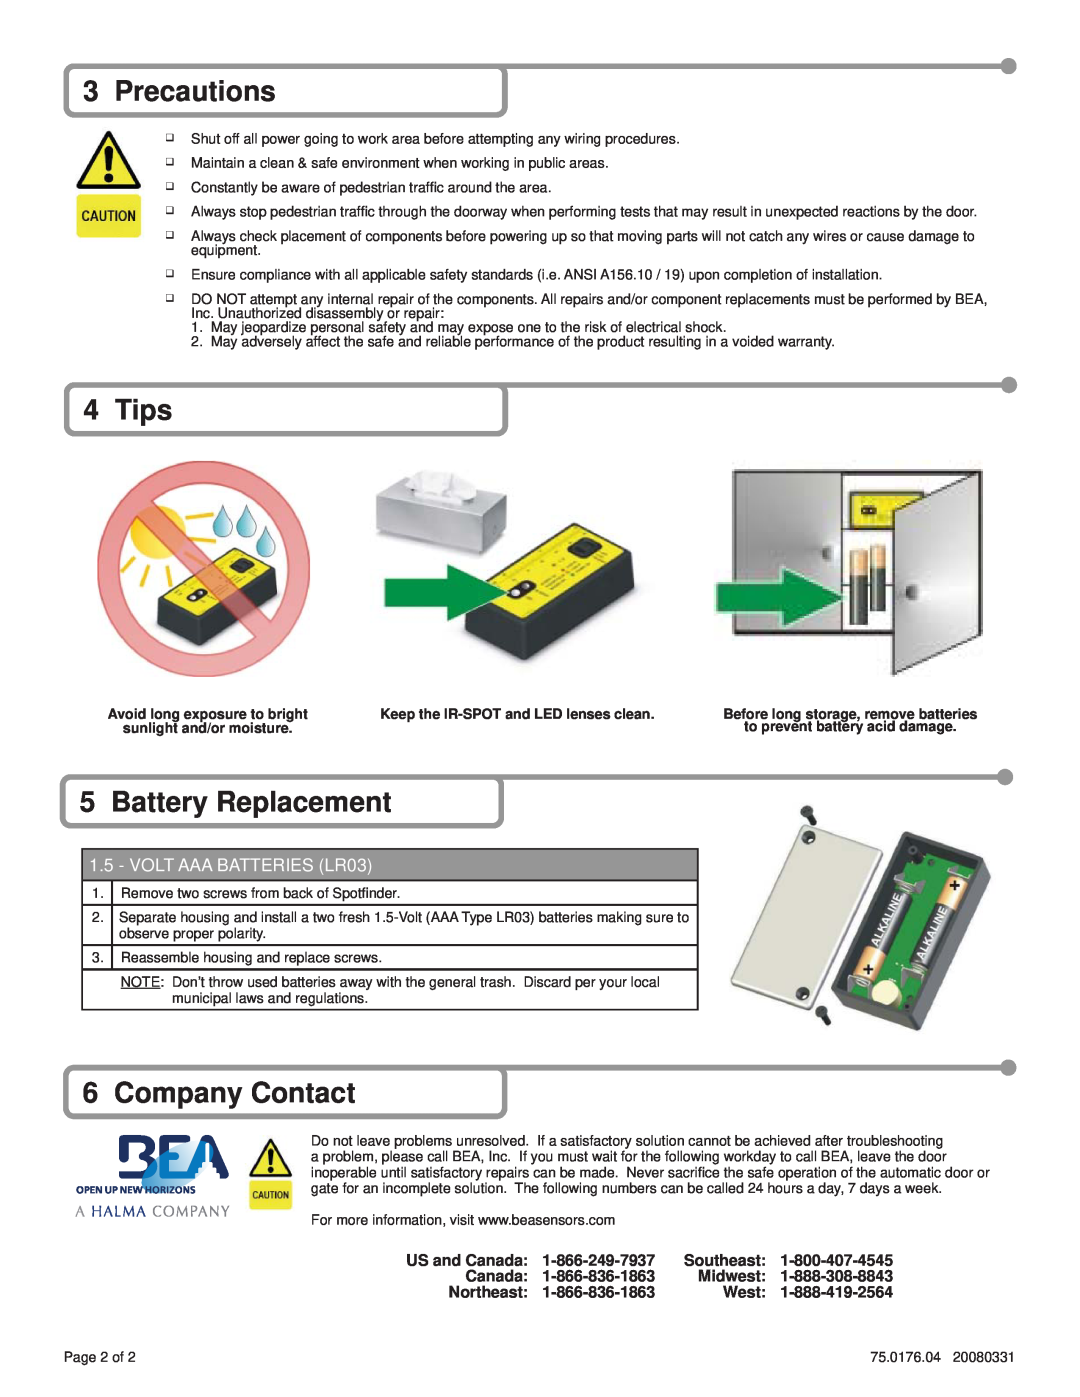 BEA Infrared Zone Locator Precautions, Tips, Battery Replacement, Company Contact, VOLT AAA BATTERIES LR03, US and Canada 